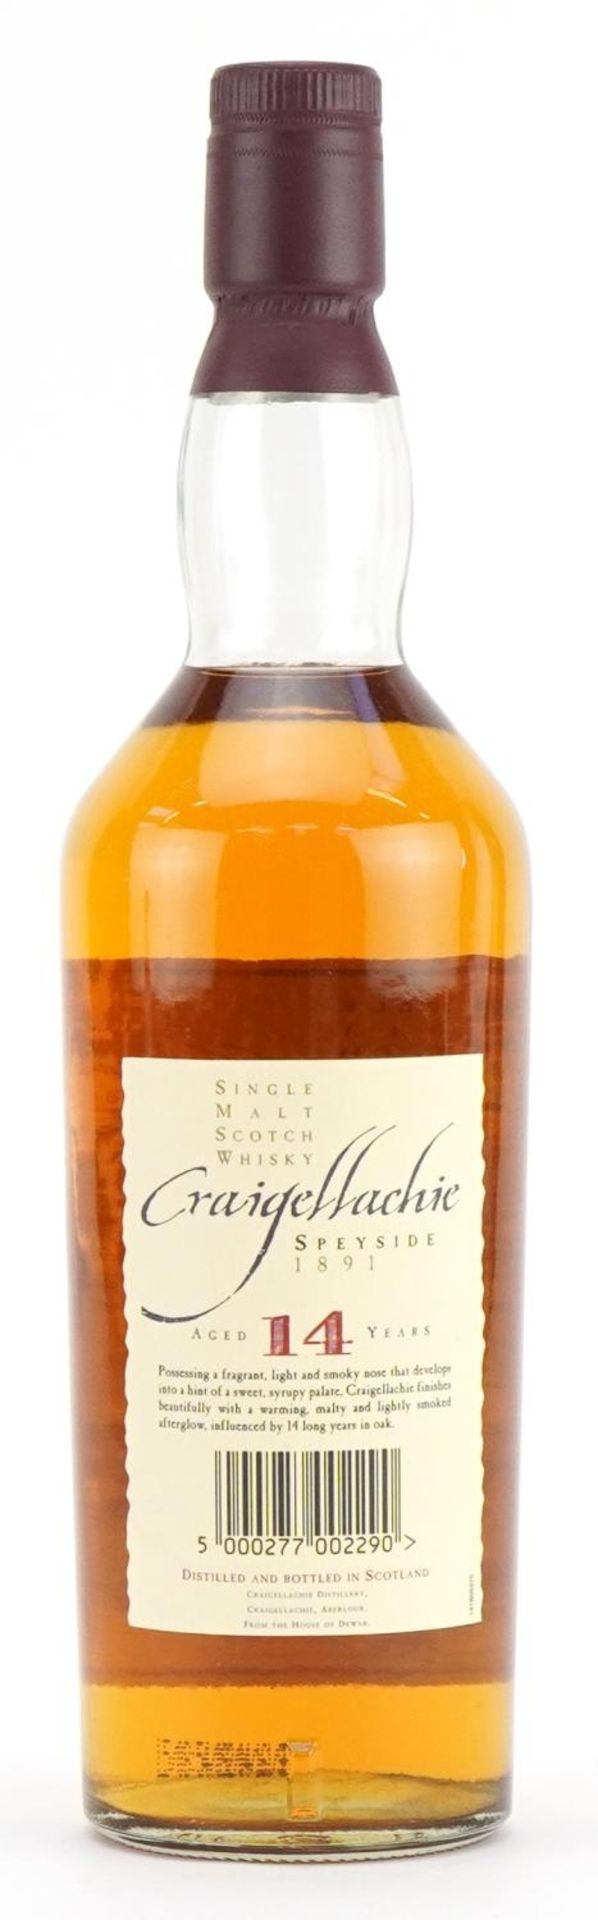 Bottle of Craigellachie Speyside Single Malt whisky with box and aged 14 years : For further - Image 3 of 3